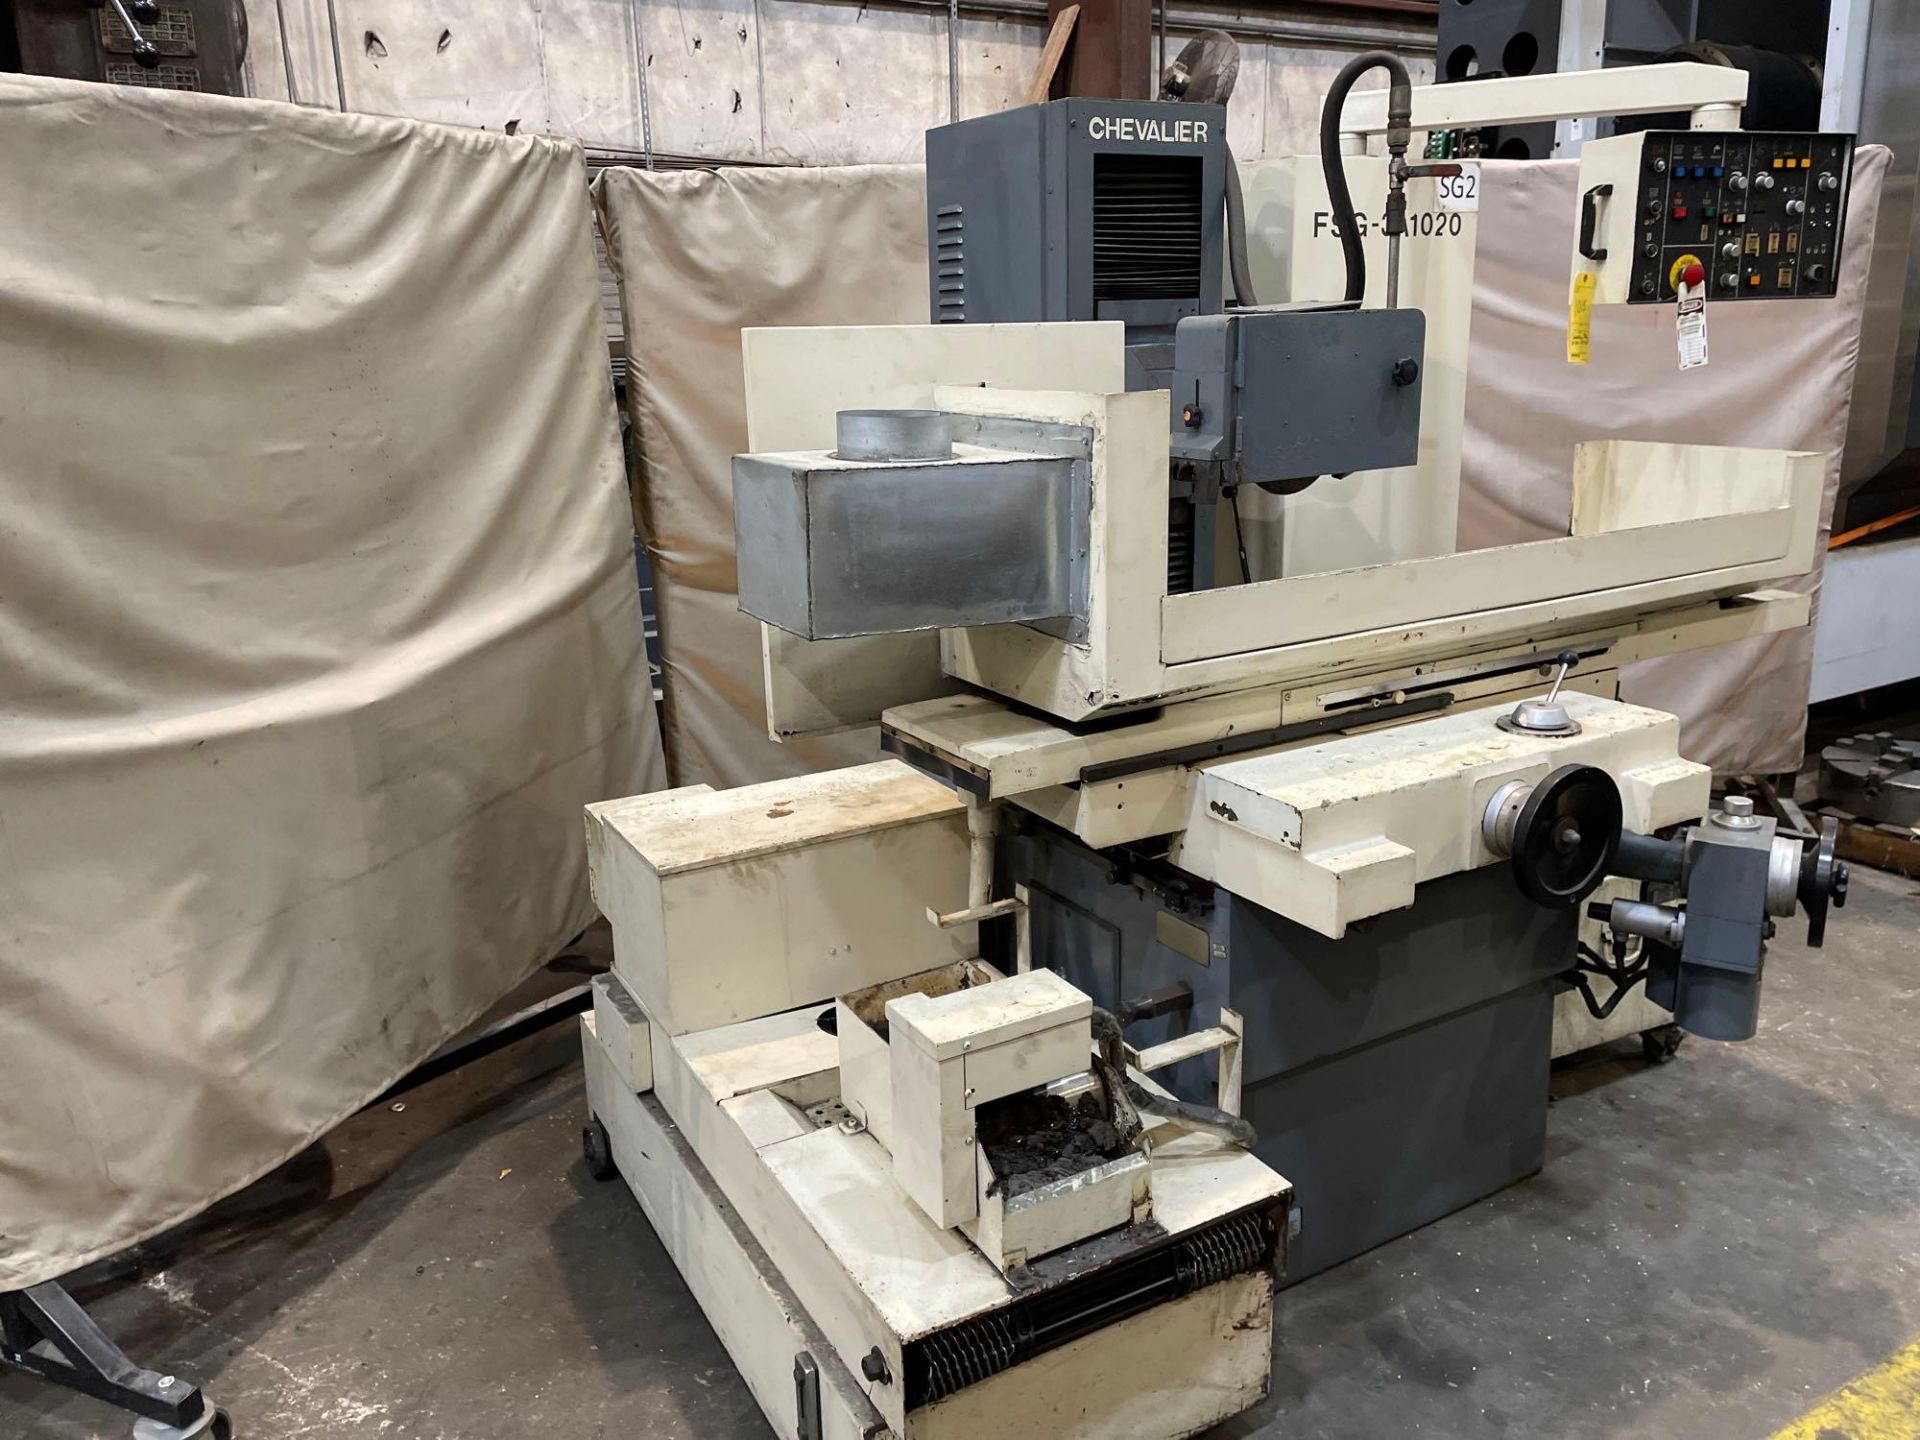 Chevalier FSG-3A1020 10" x 20" Reciprocating Table Surface Grinder - Image 4 of 14